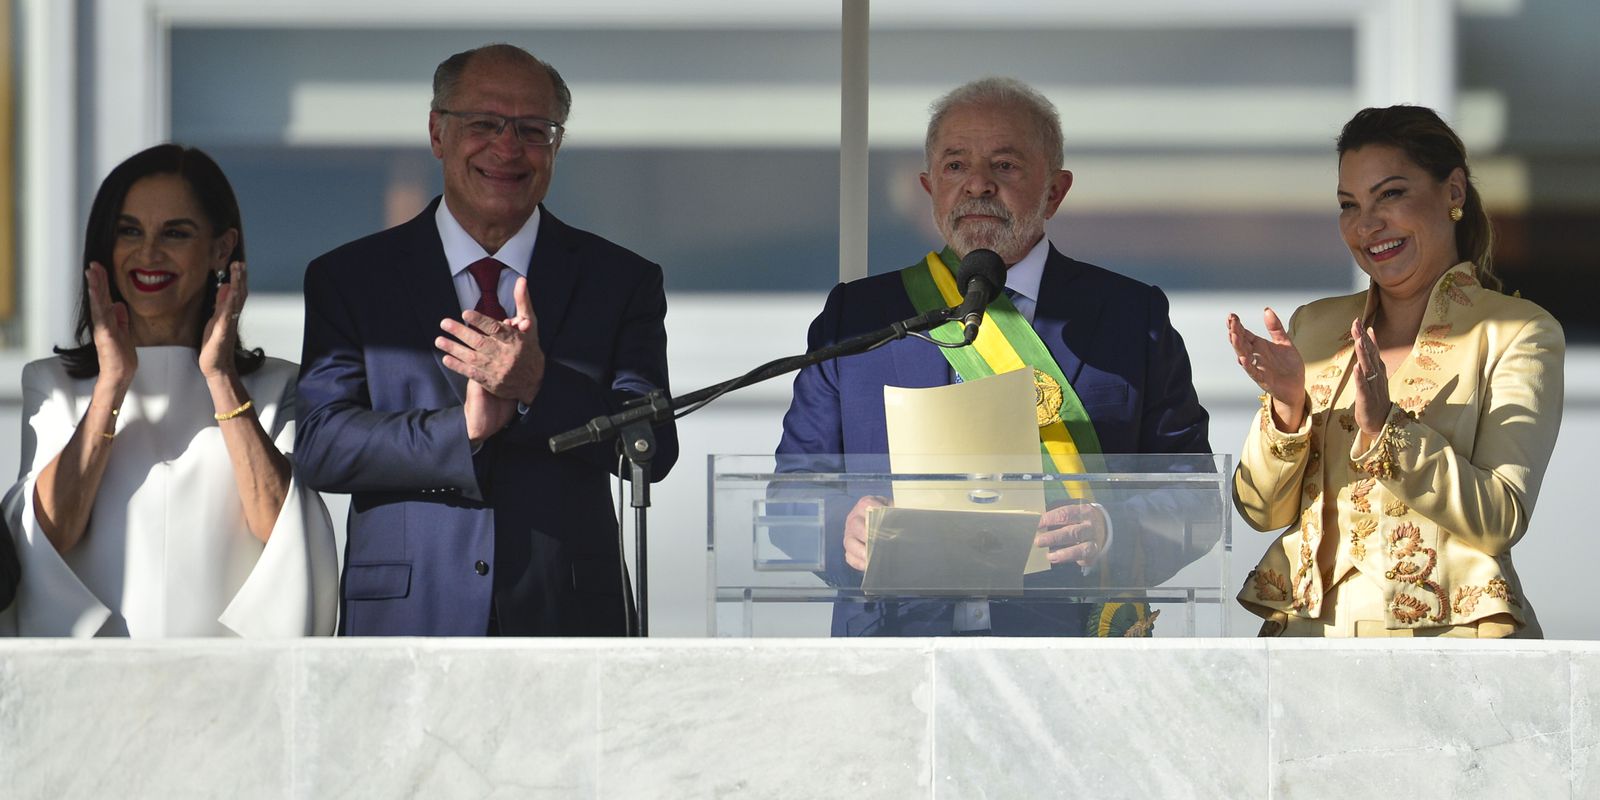 In the parliament, Lula reassumes commitment to take care of Brazilians